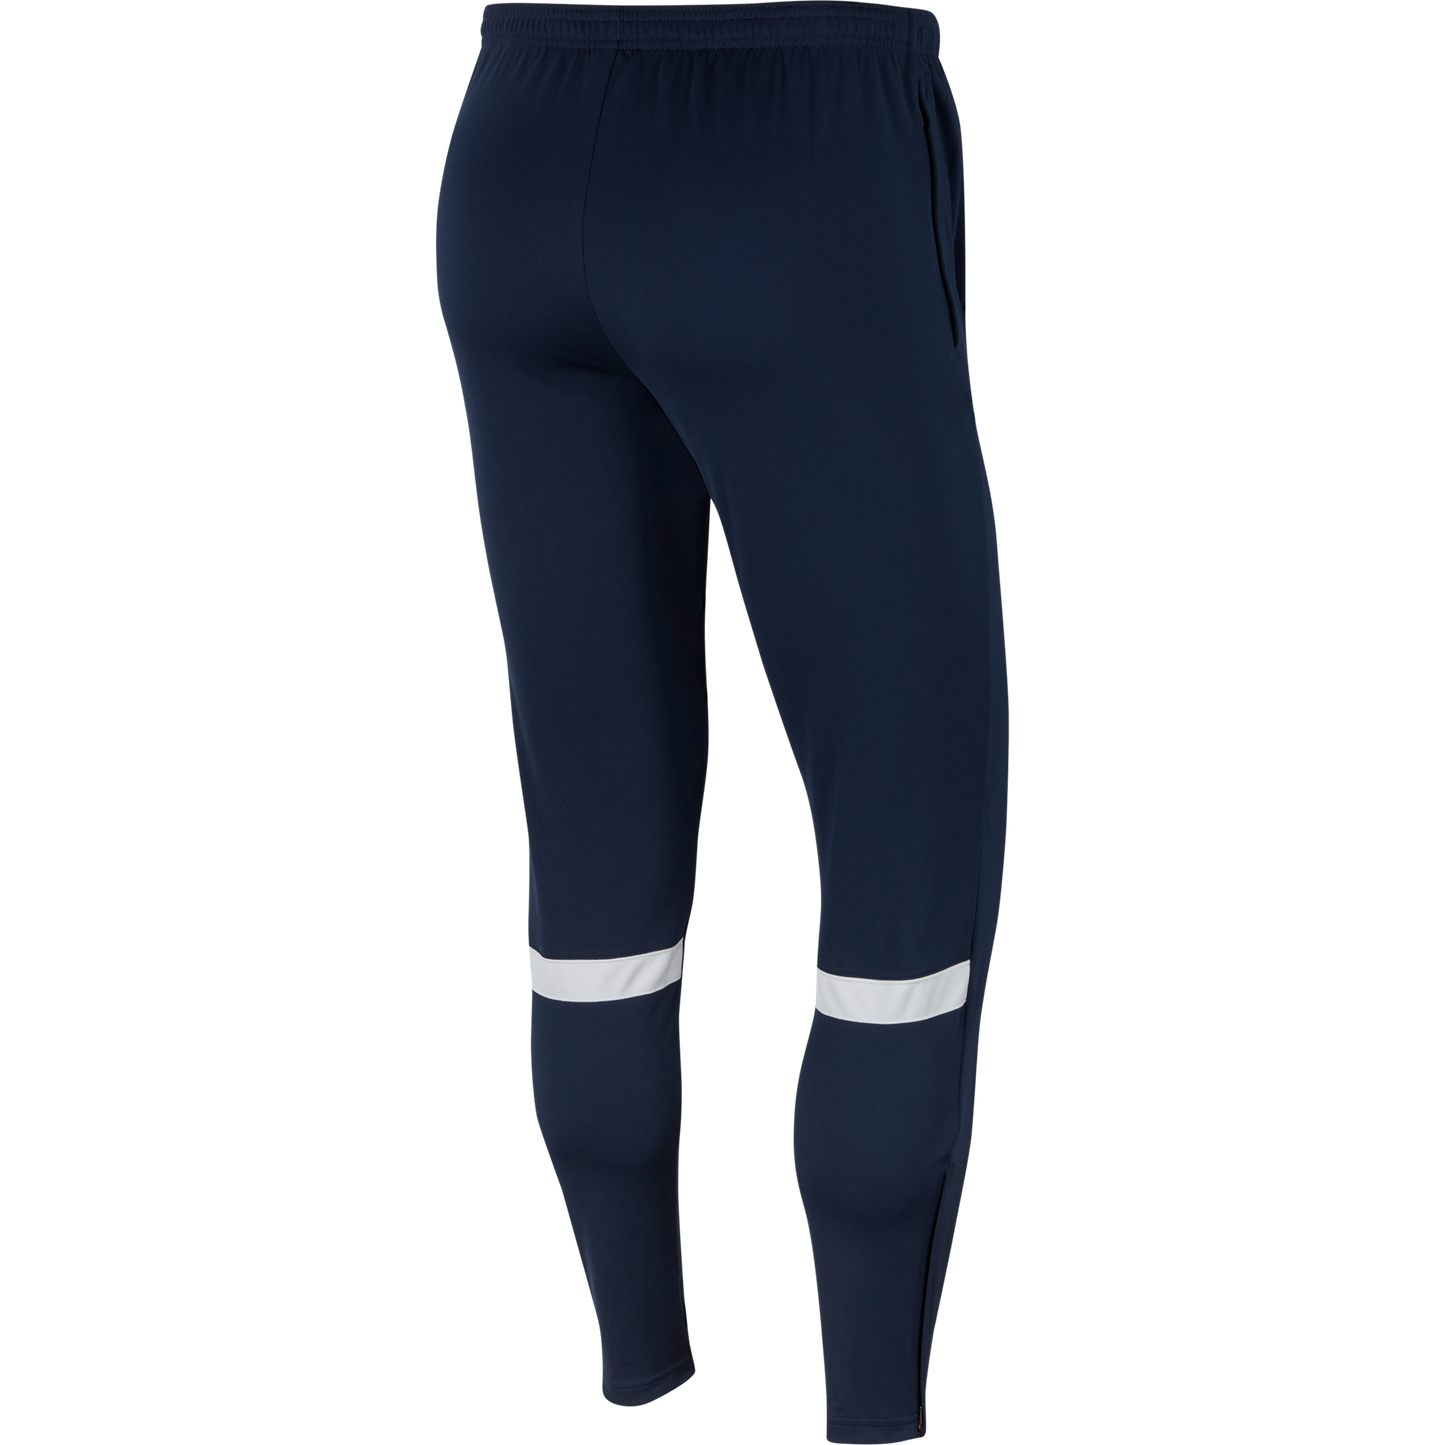 NEW PLYMOUTH RANGERS AFC ACADEMY 21 PANT - MEN'S